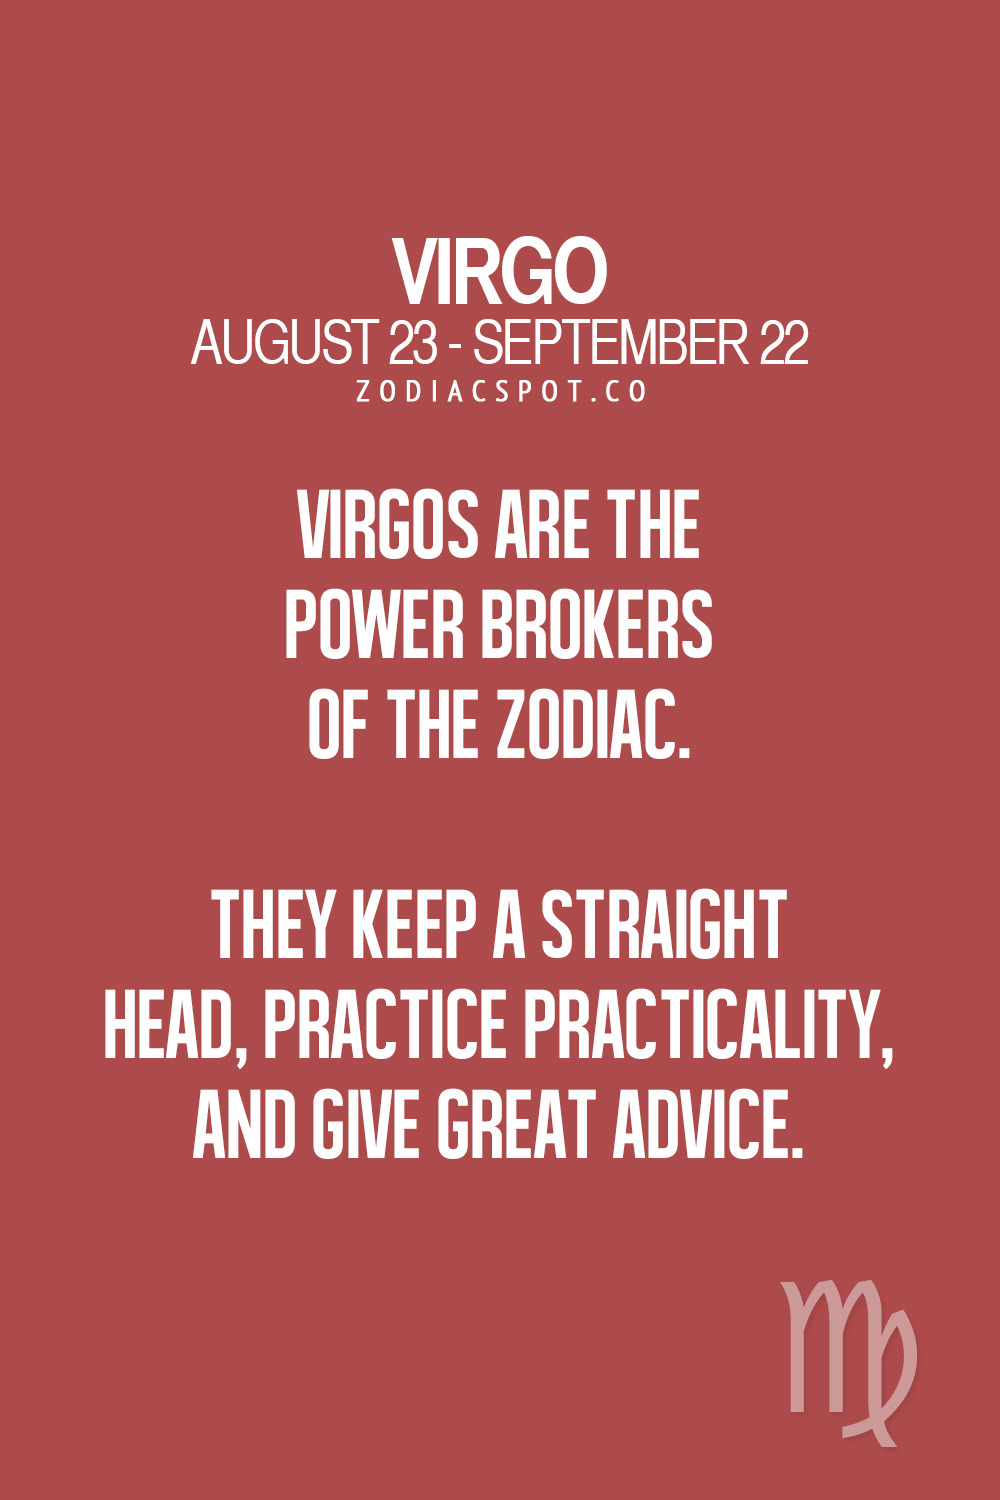 what is the best zodiac sign